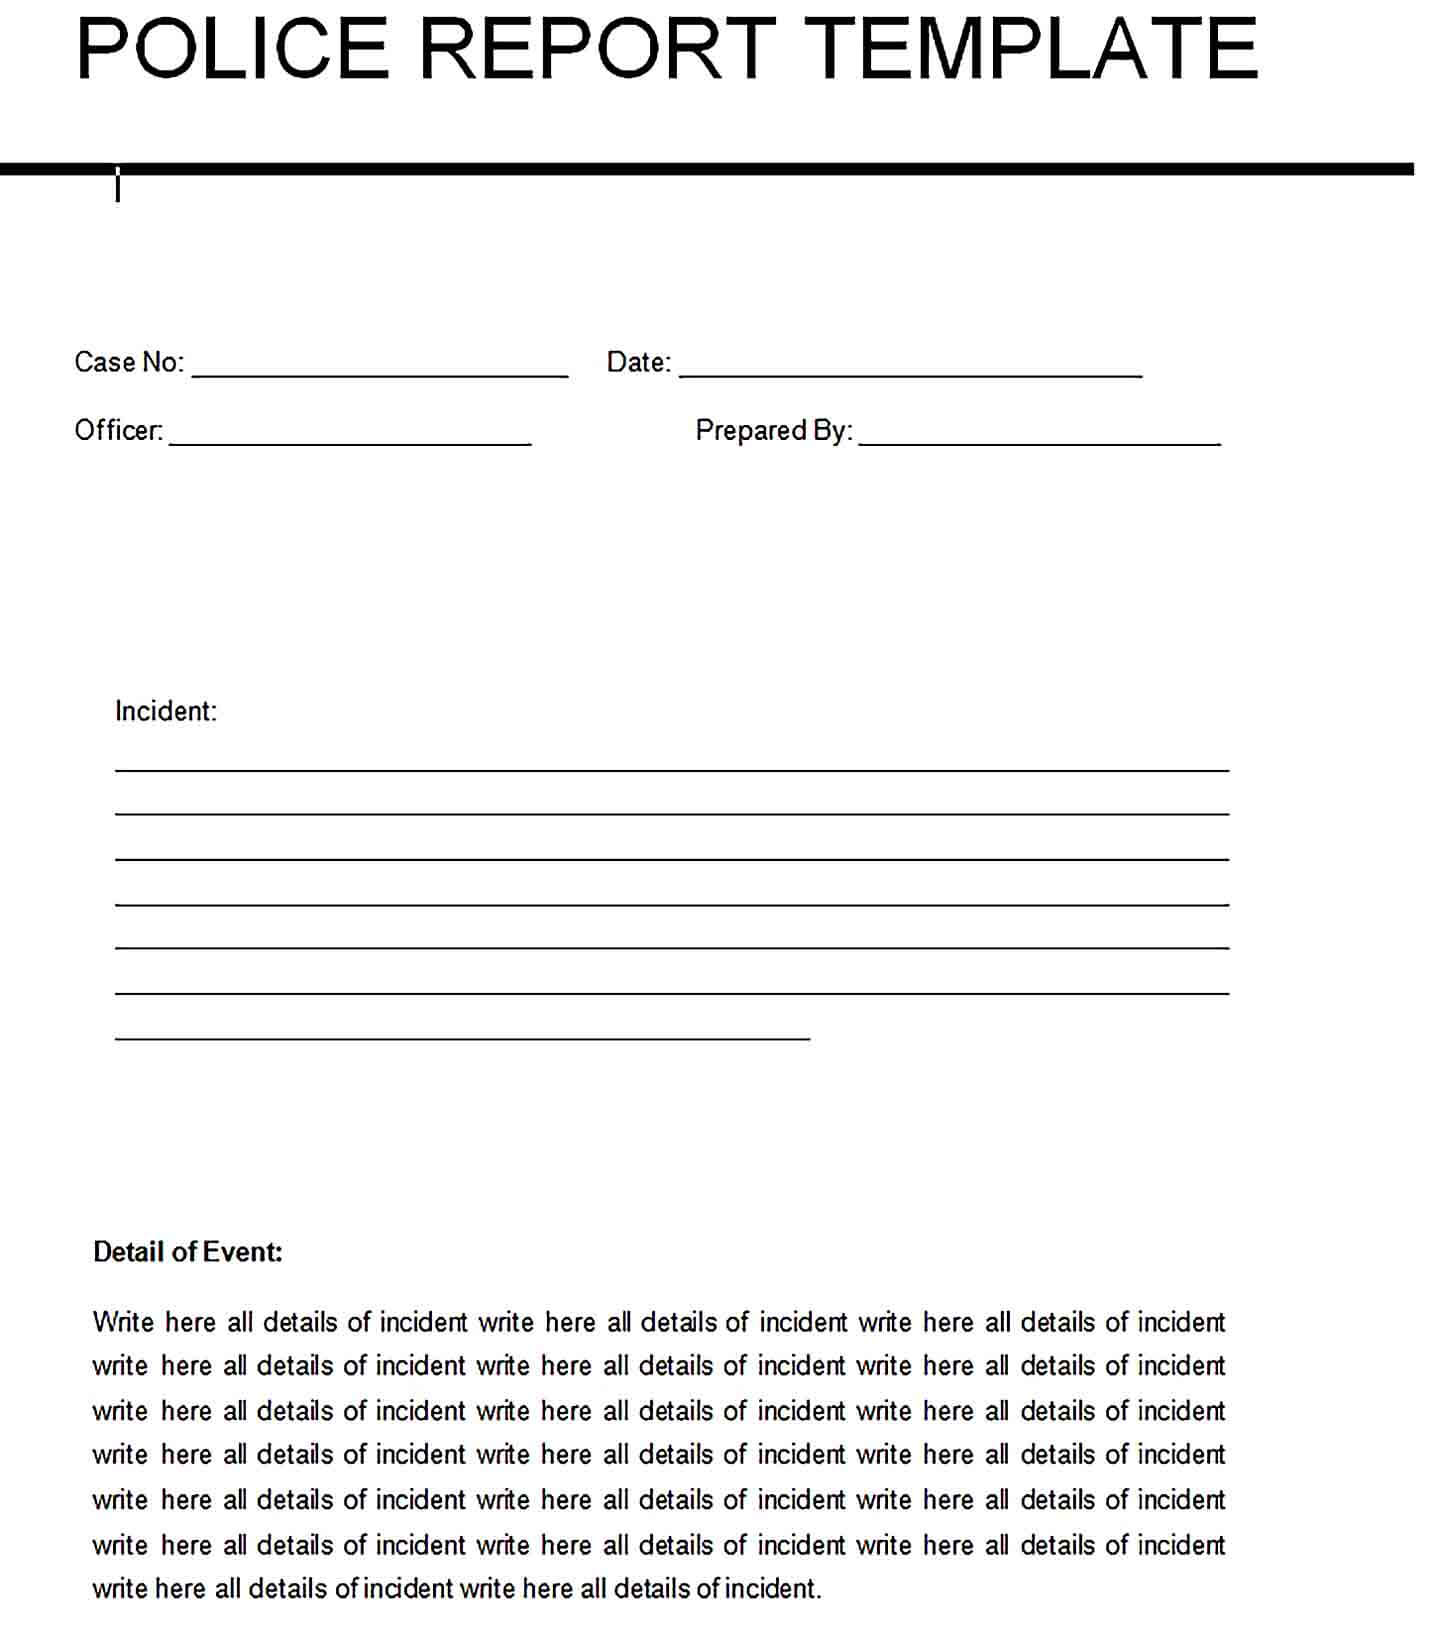 Sample blank police report template 1